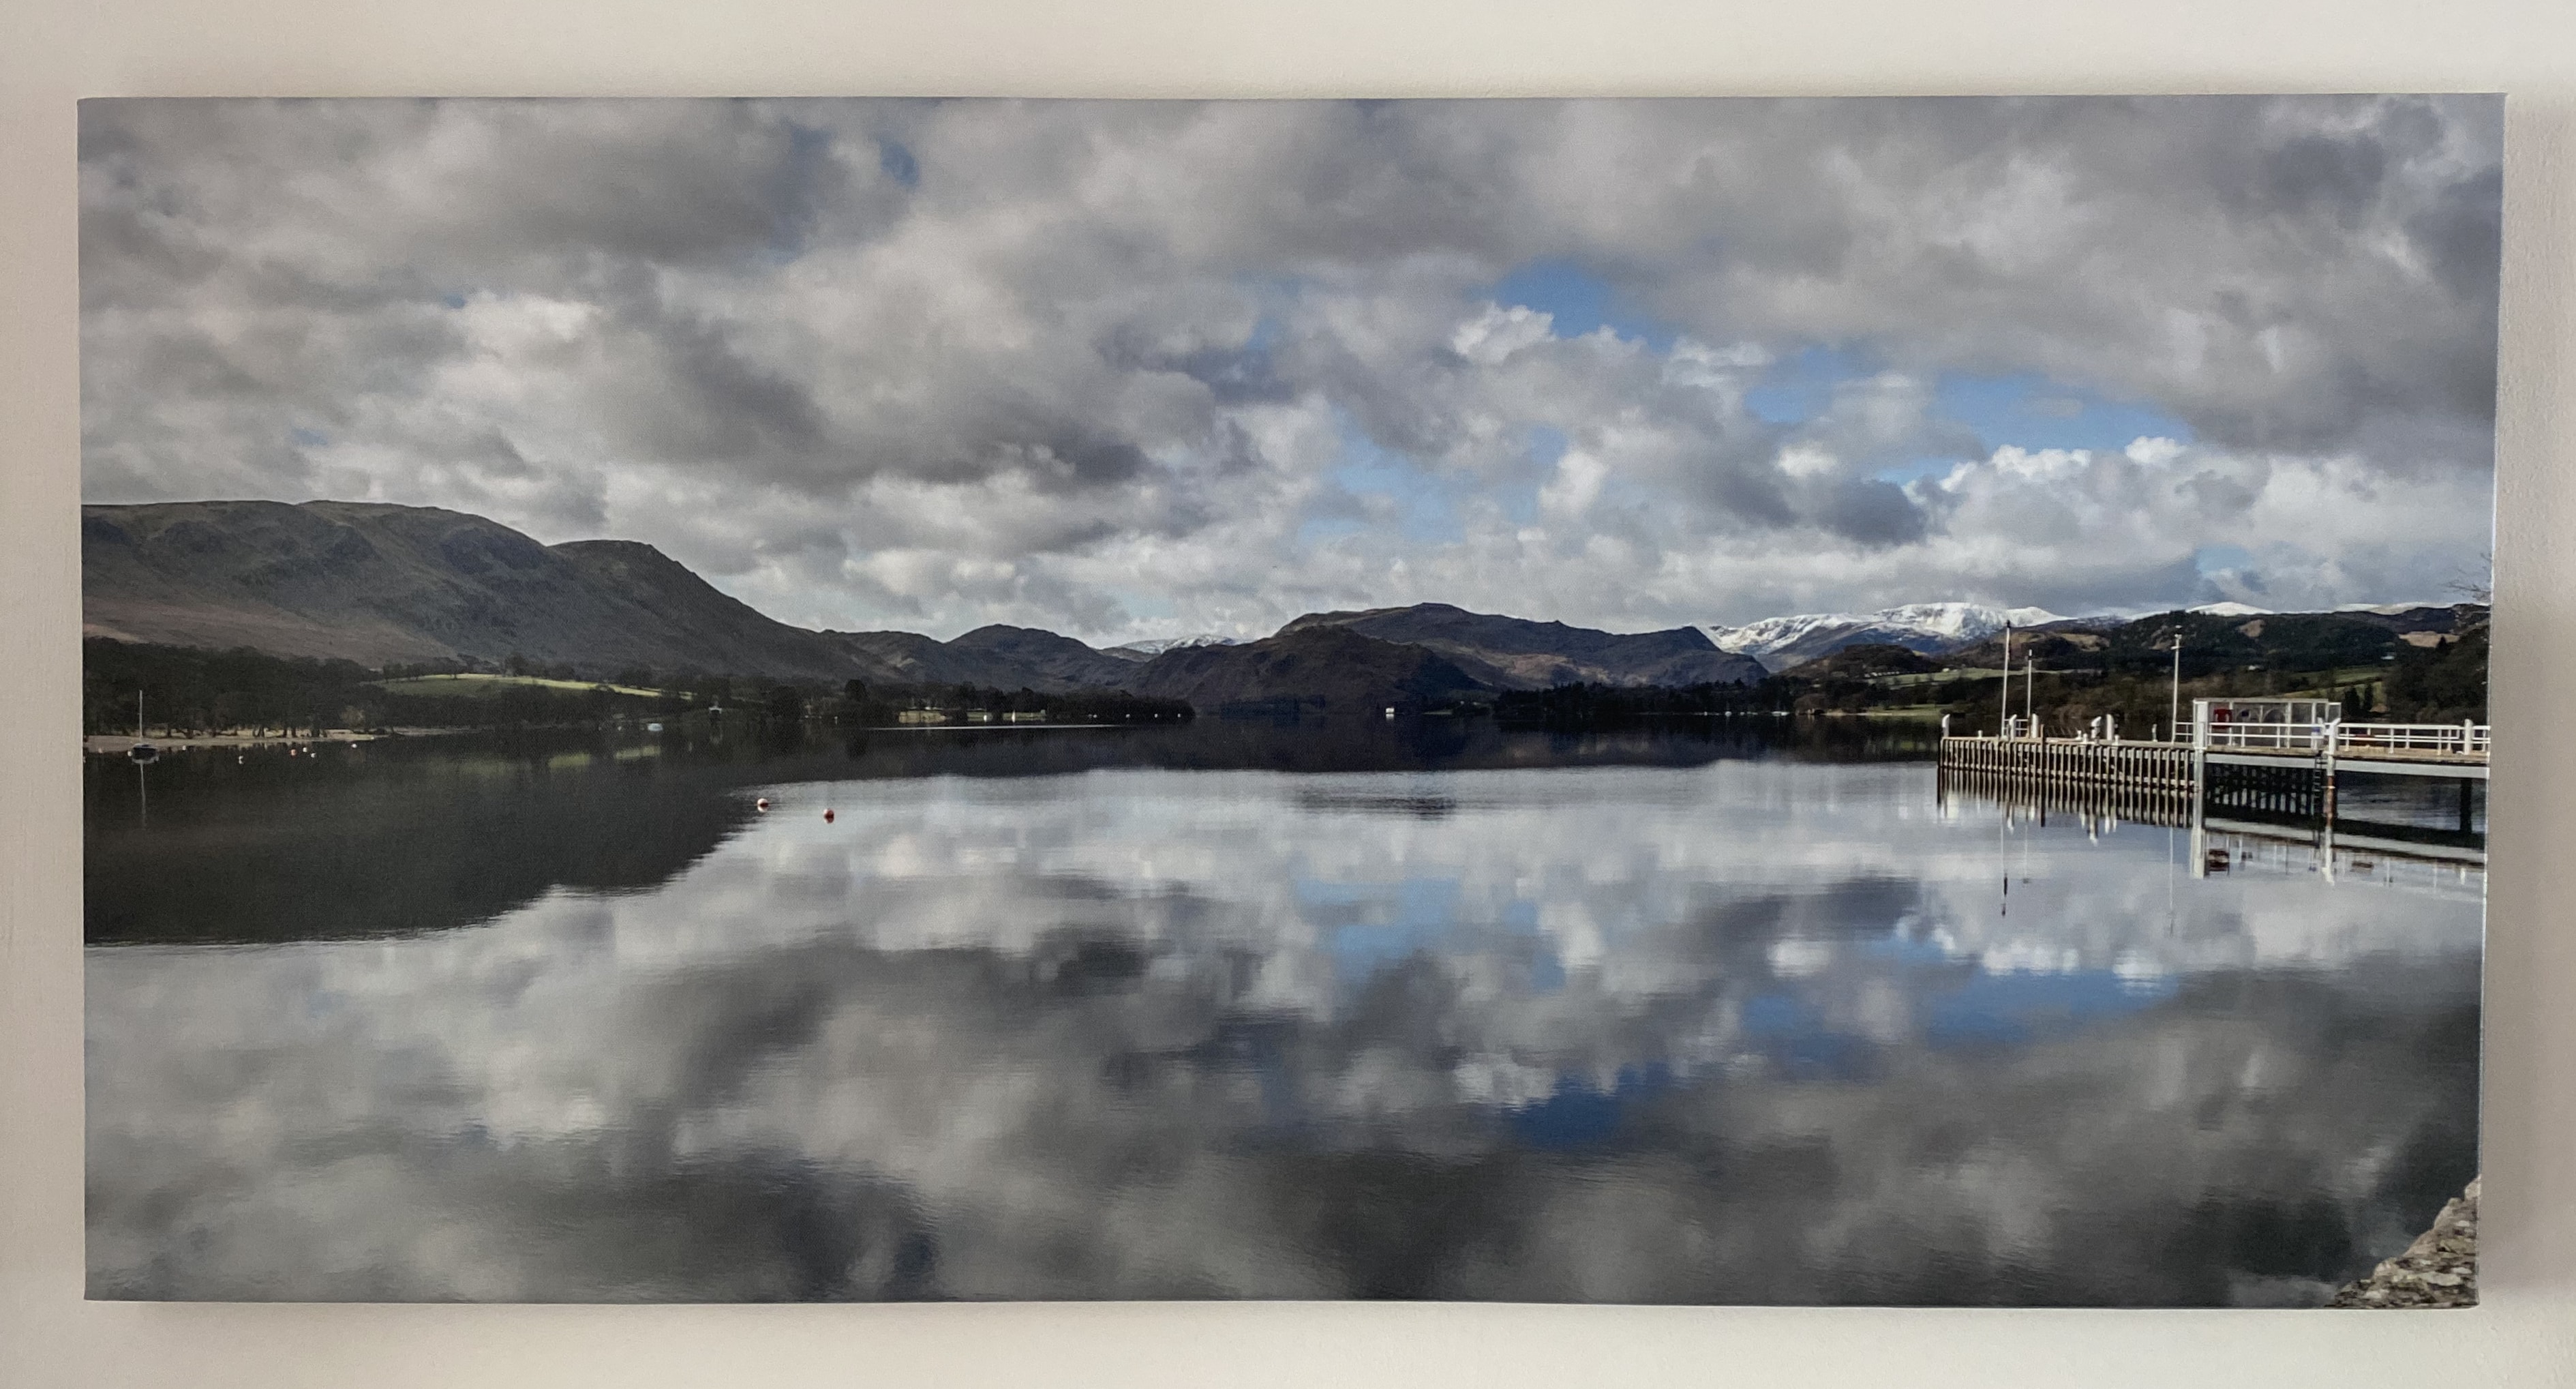 A panoramic canvas showing a lake and pier, with mountains in the distance.